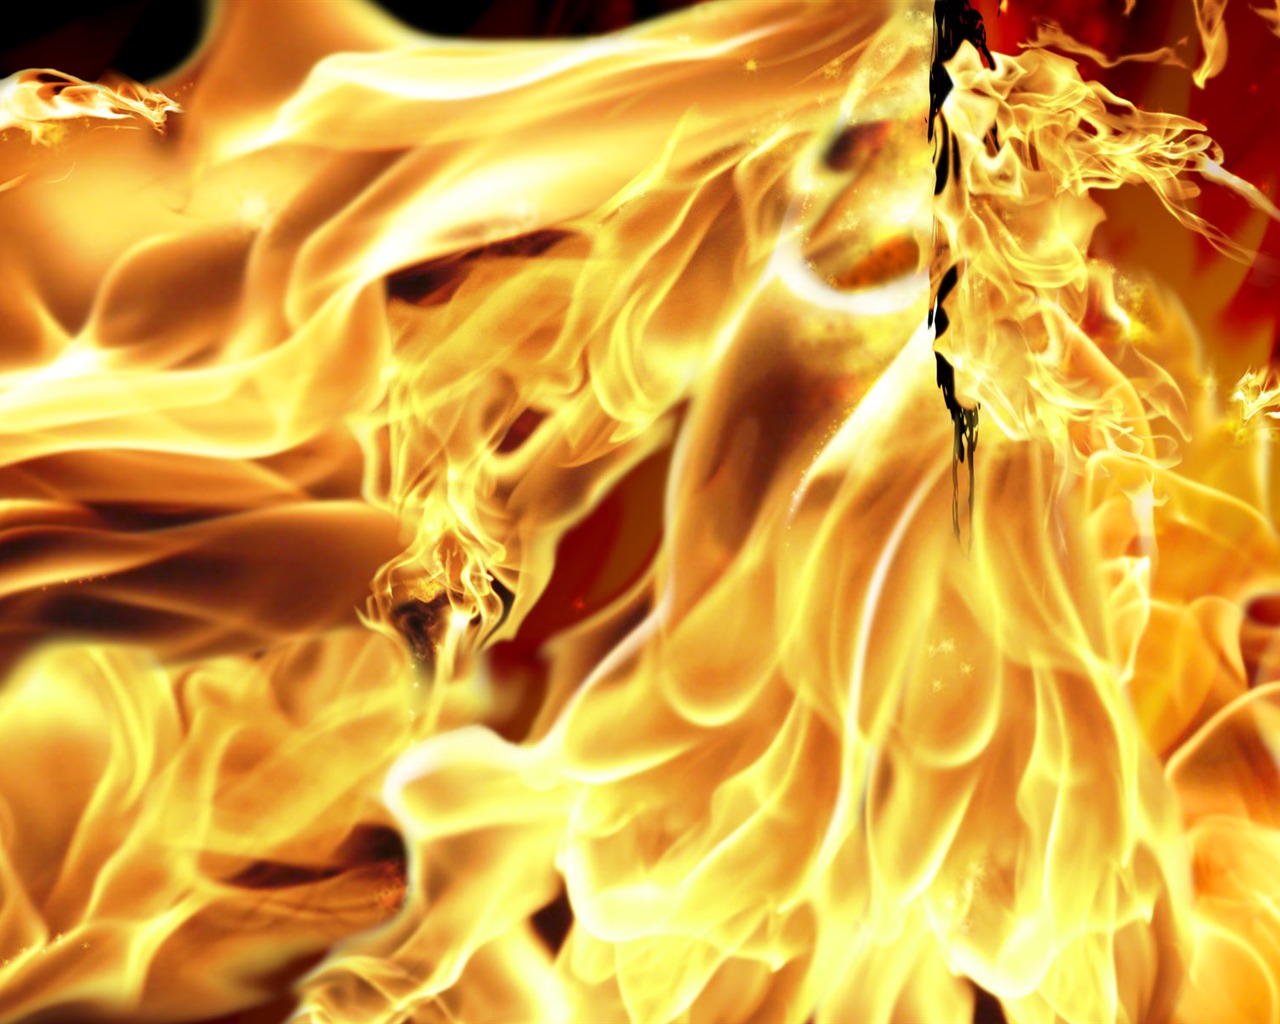 Flame Feature HD Wallpaper #2 - 1280x1024